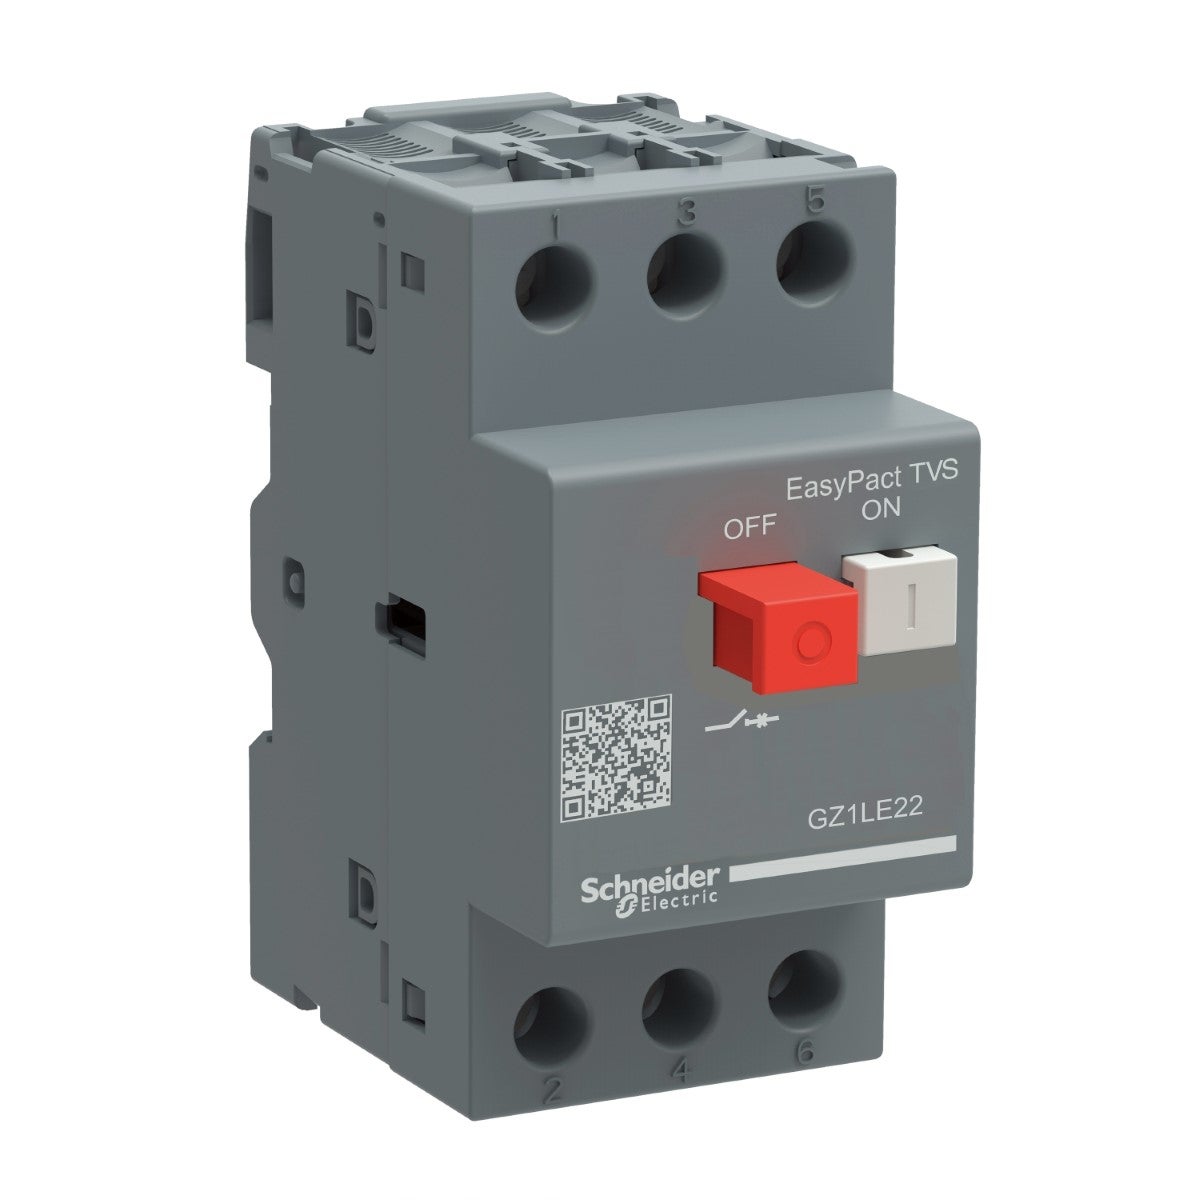 Motor circuit breaker,EasyPact GZ1,3P,25A,magnetic detection